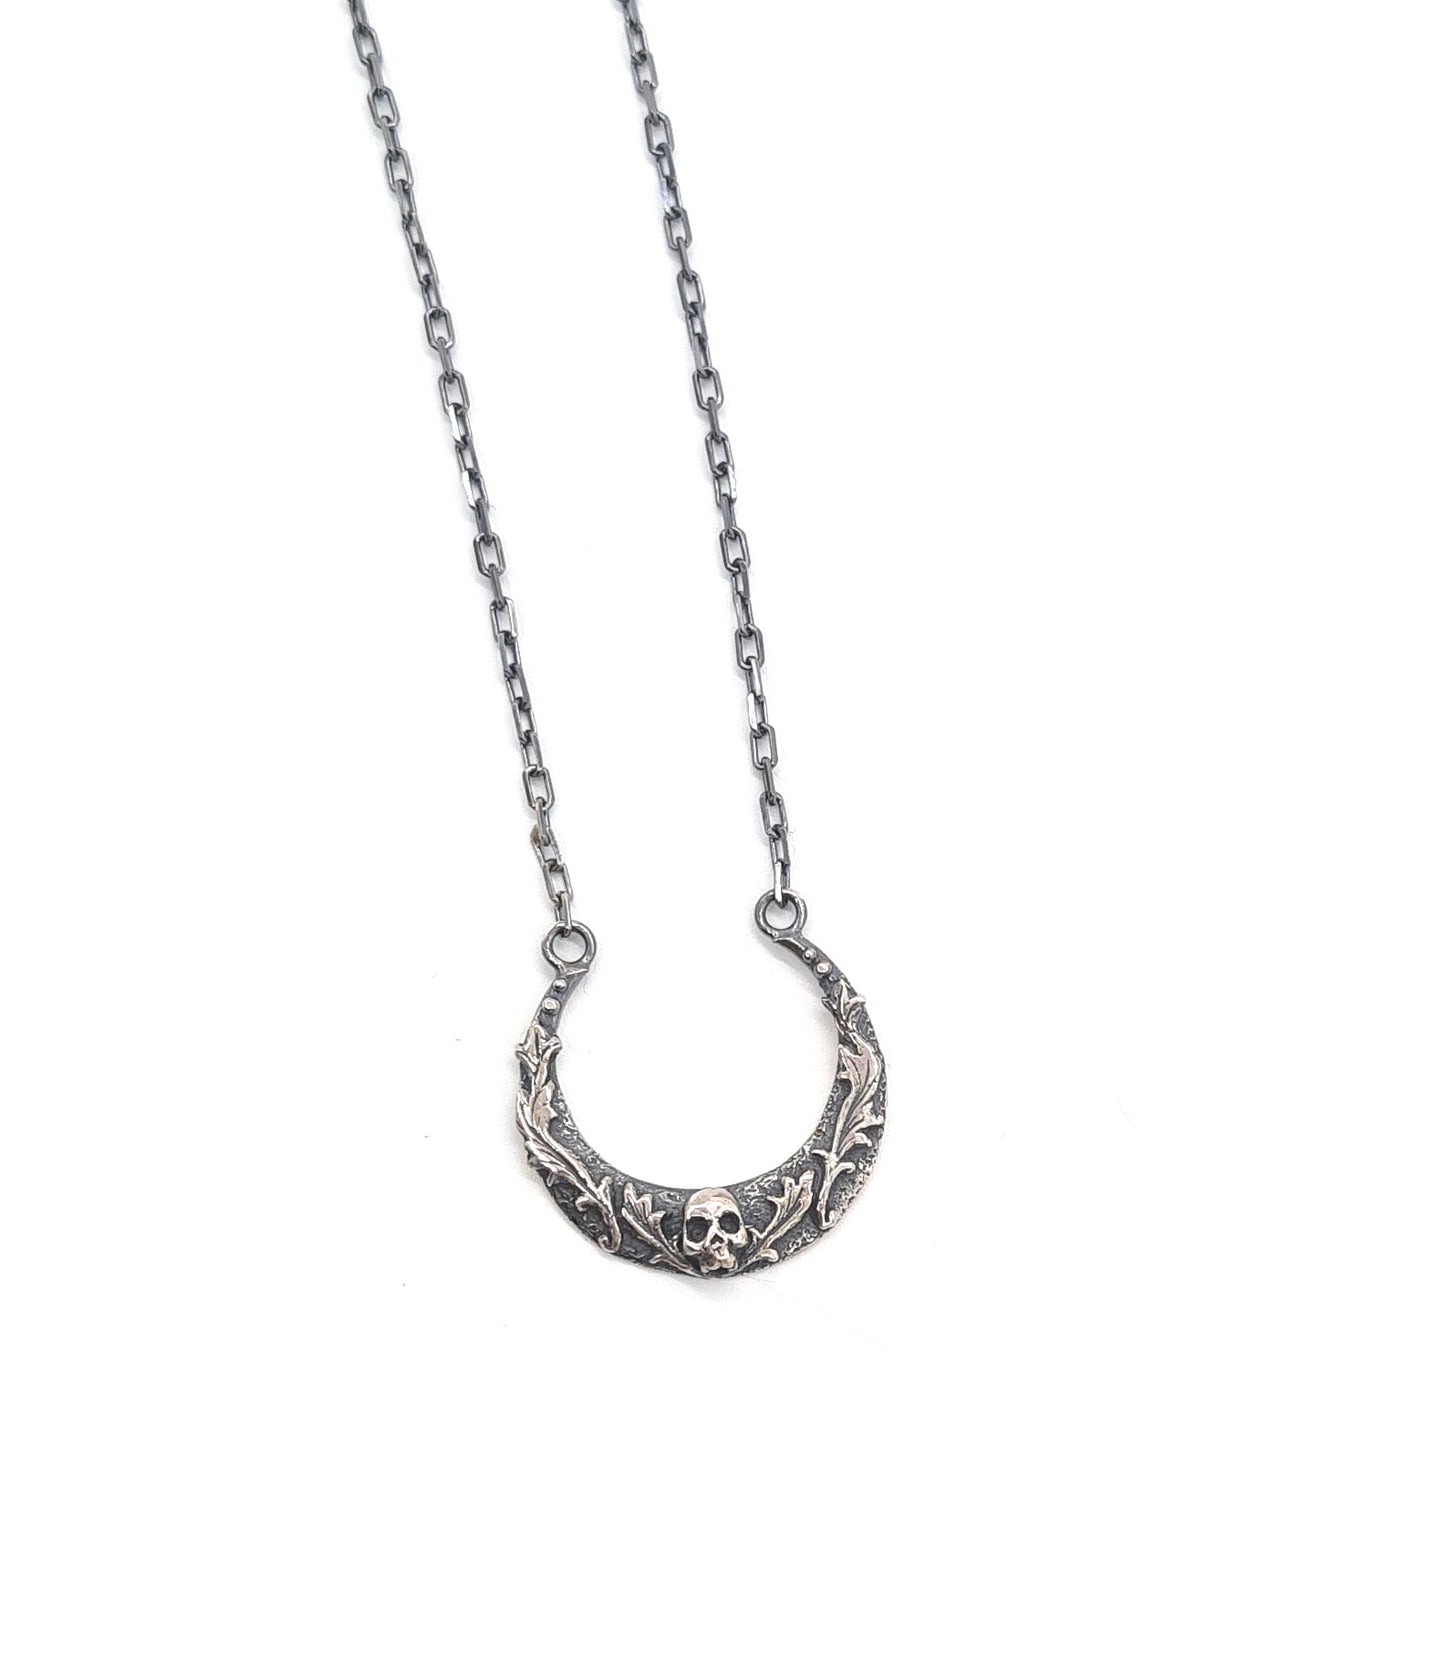 Old Moon Necklace